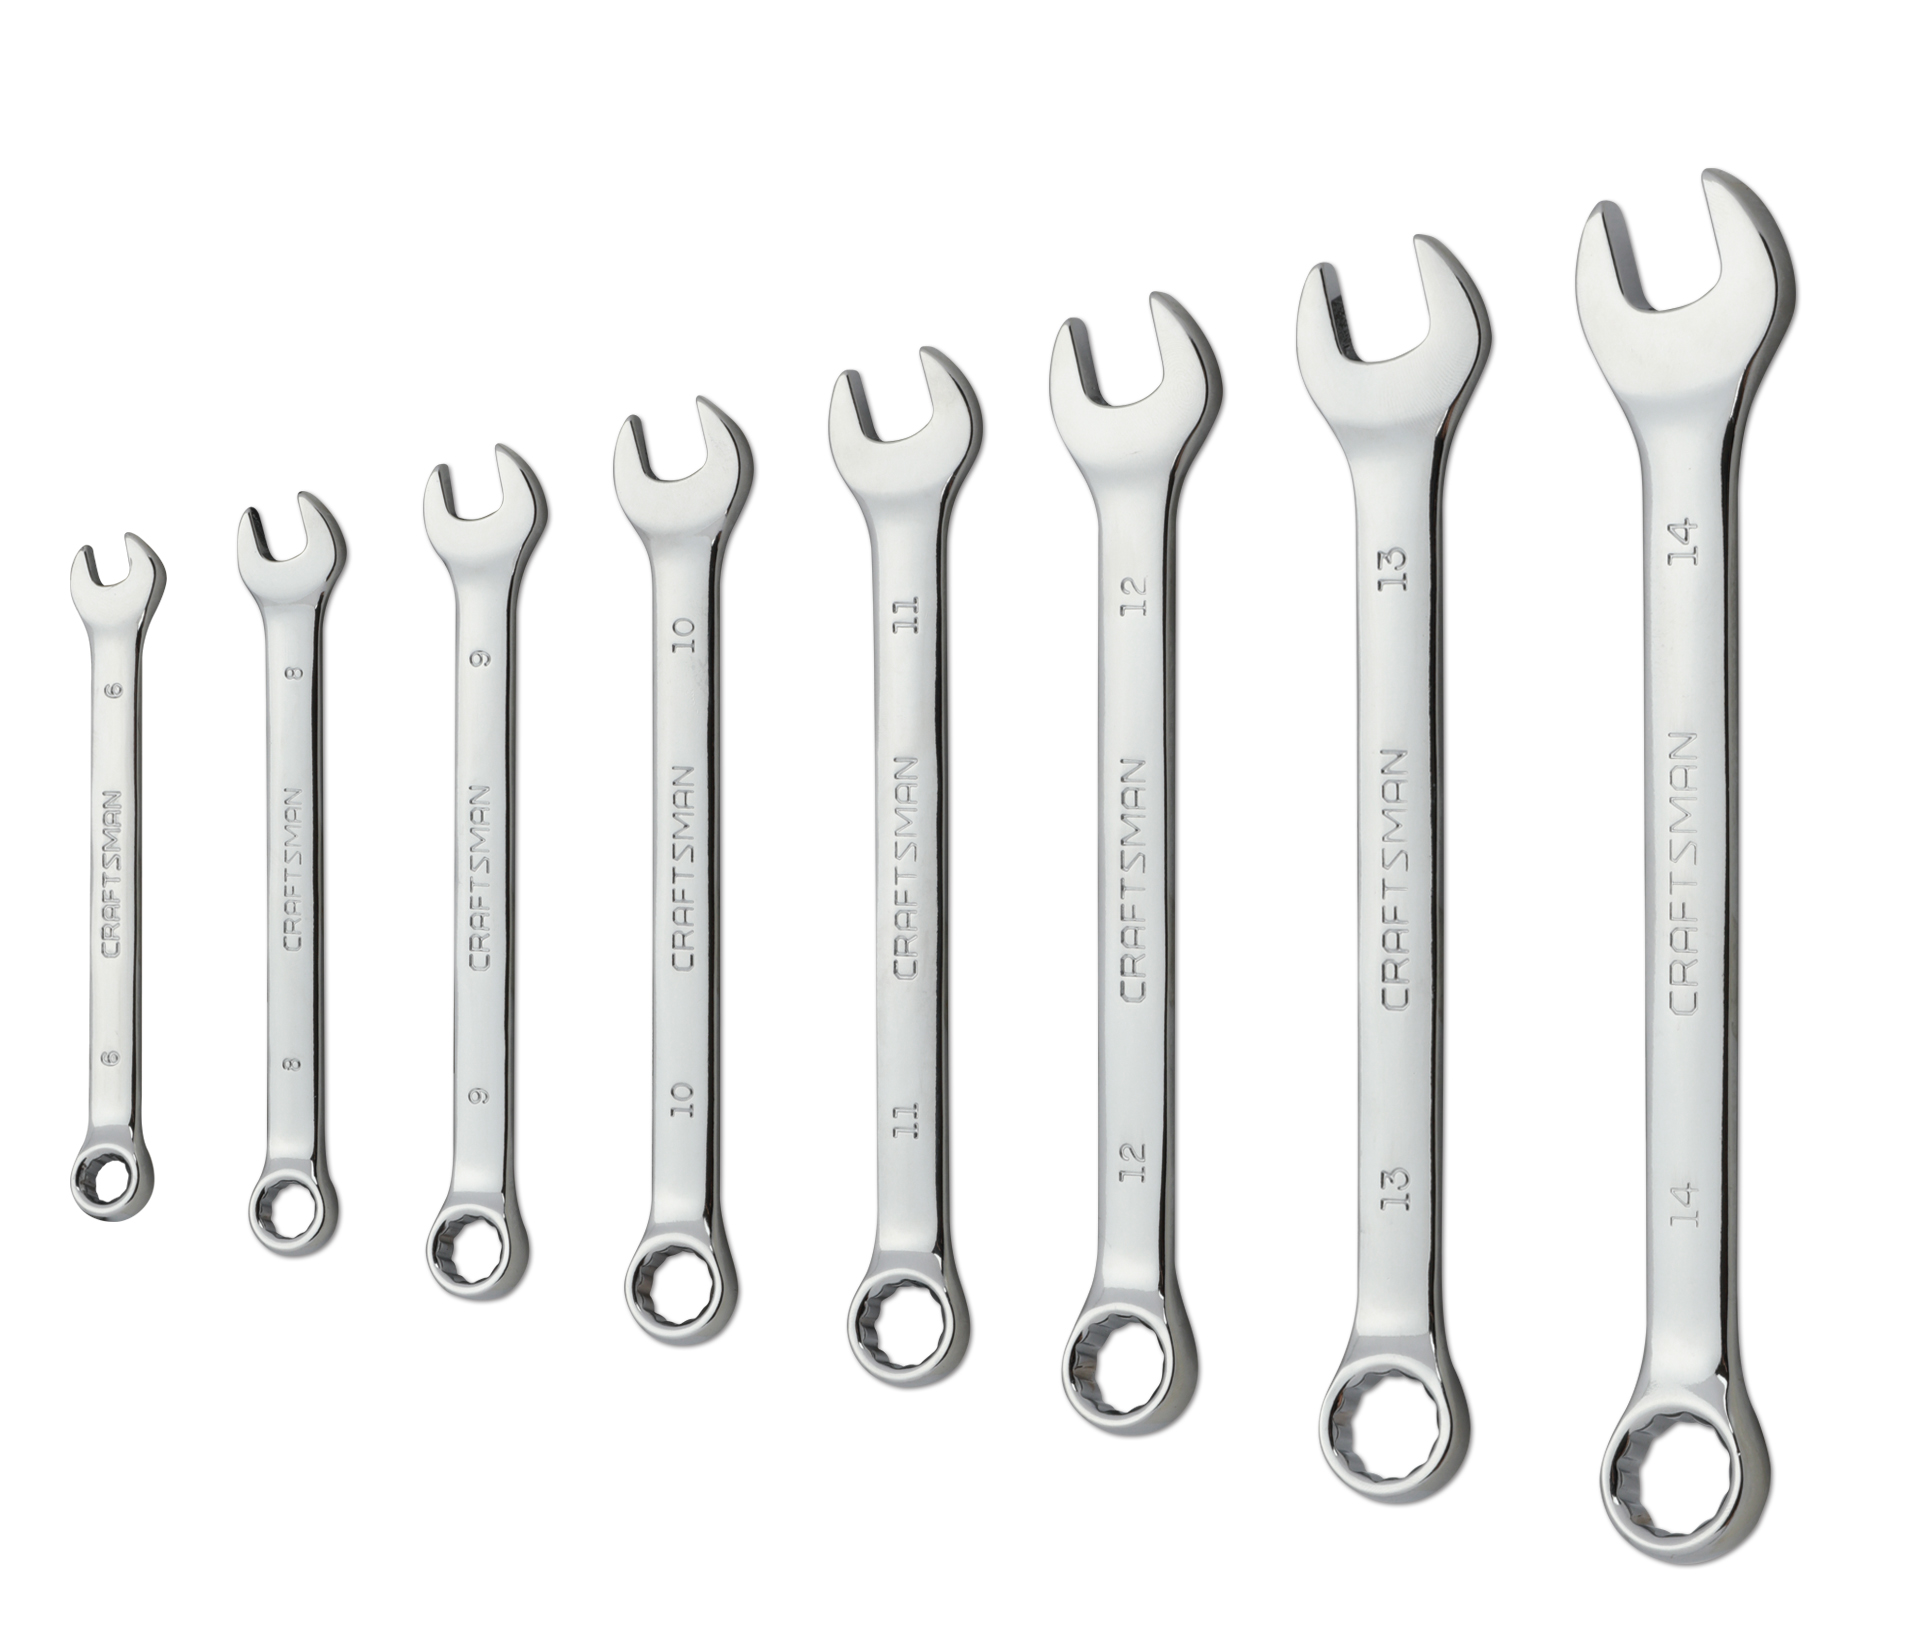 Craftsman Ratcheting Chrome Polished Wrenches in Various Sizes Choose Size